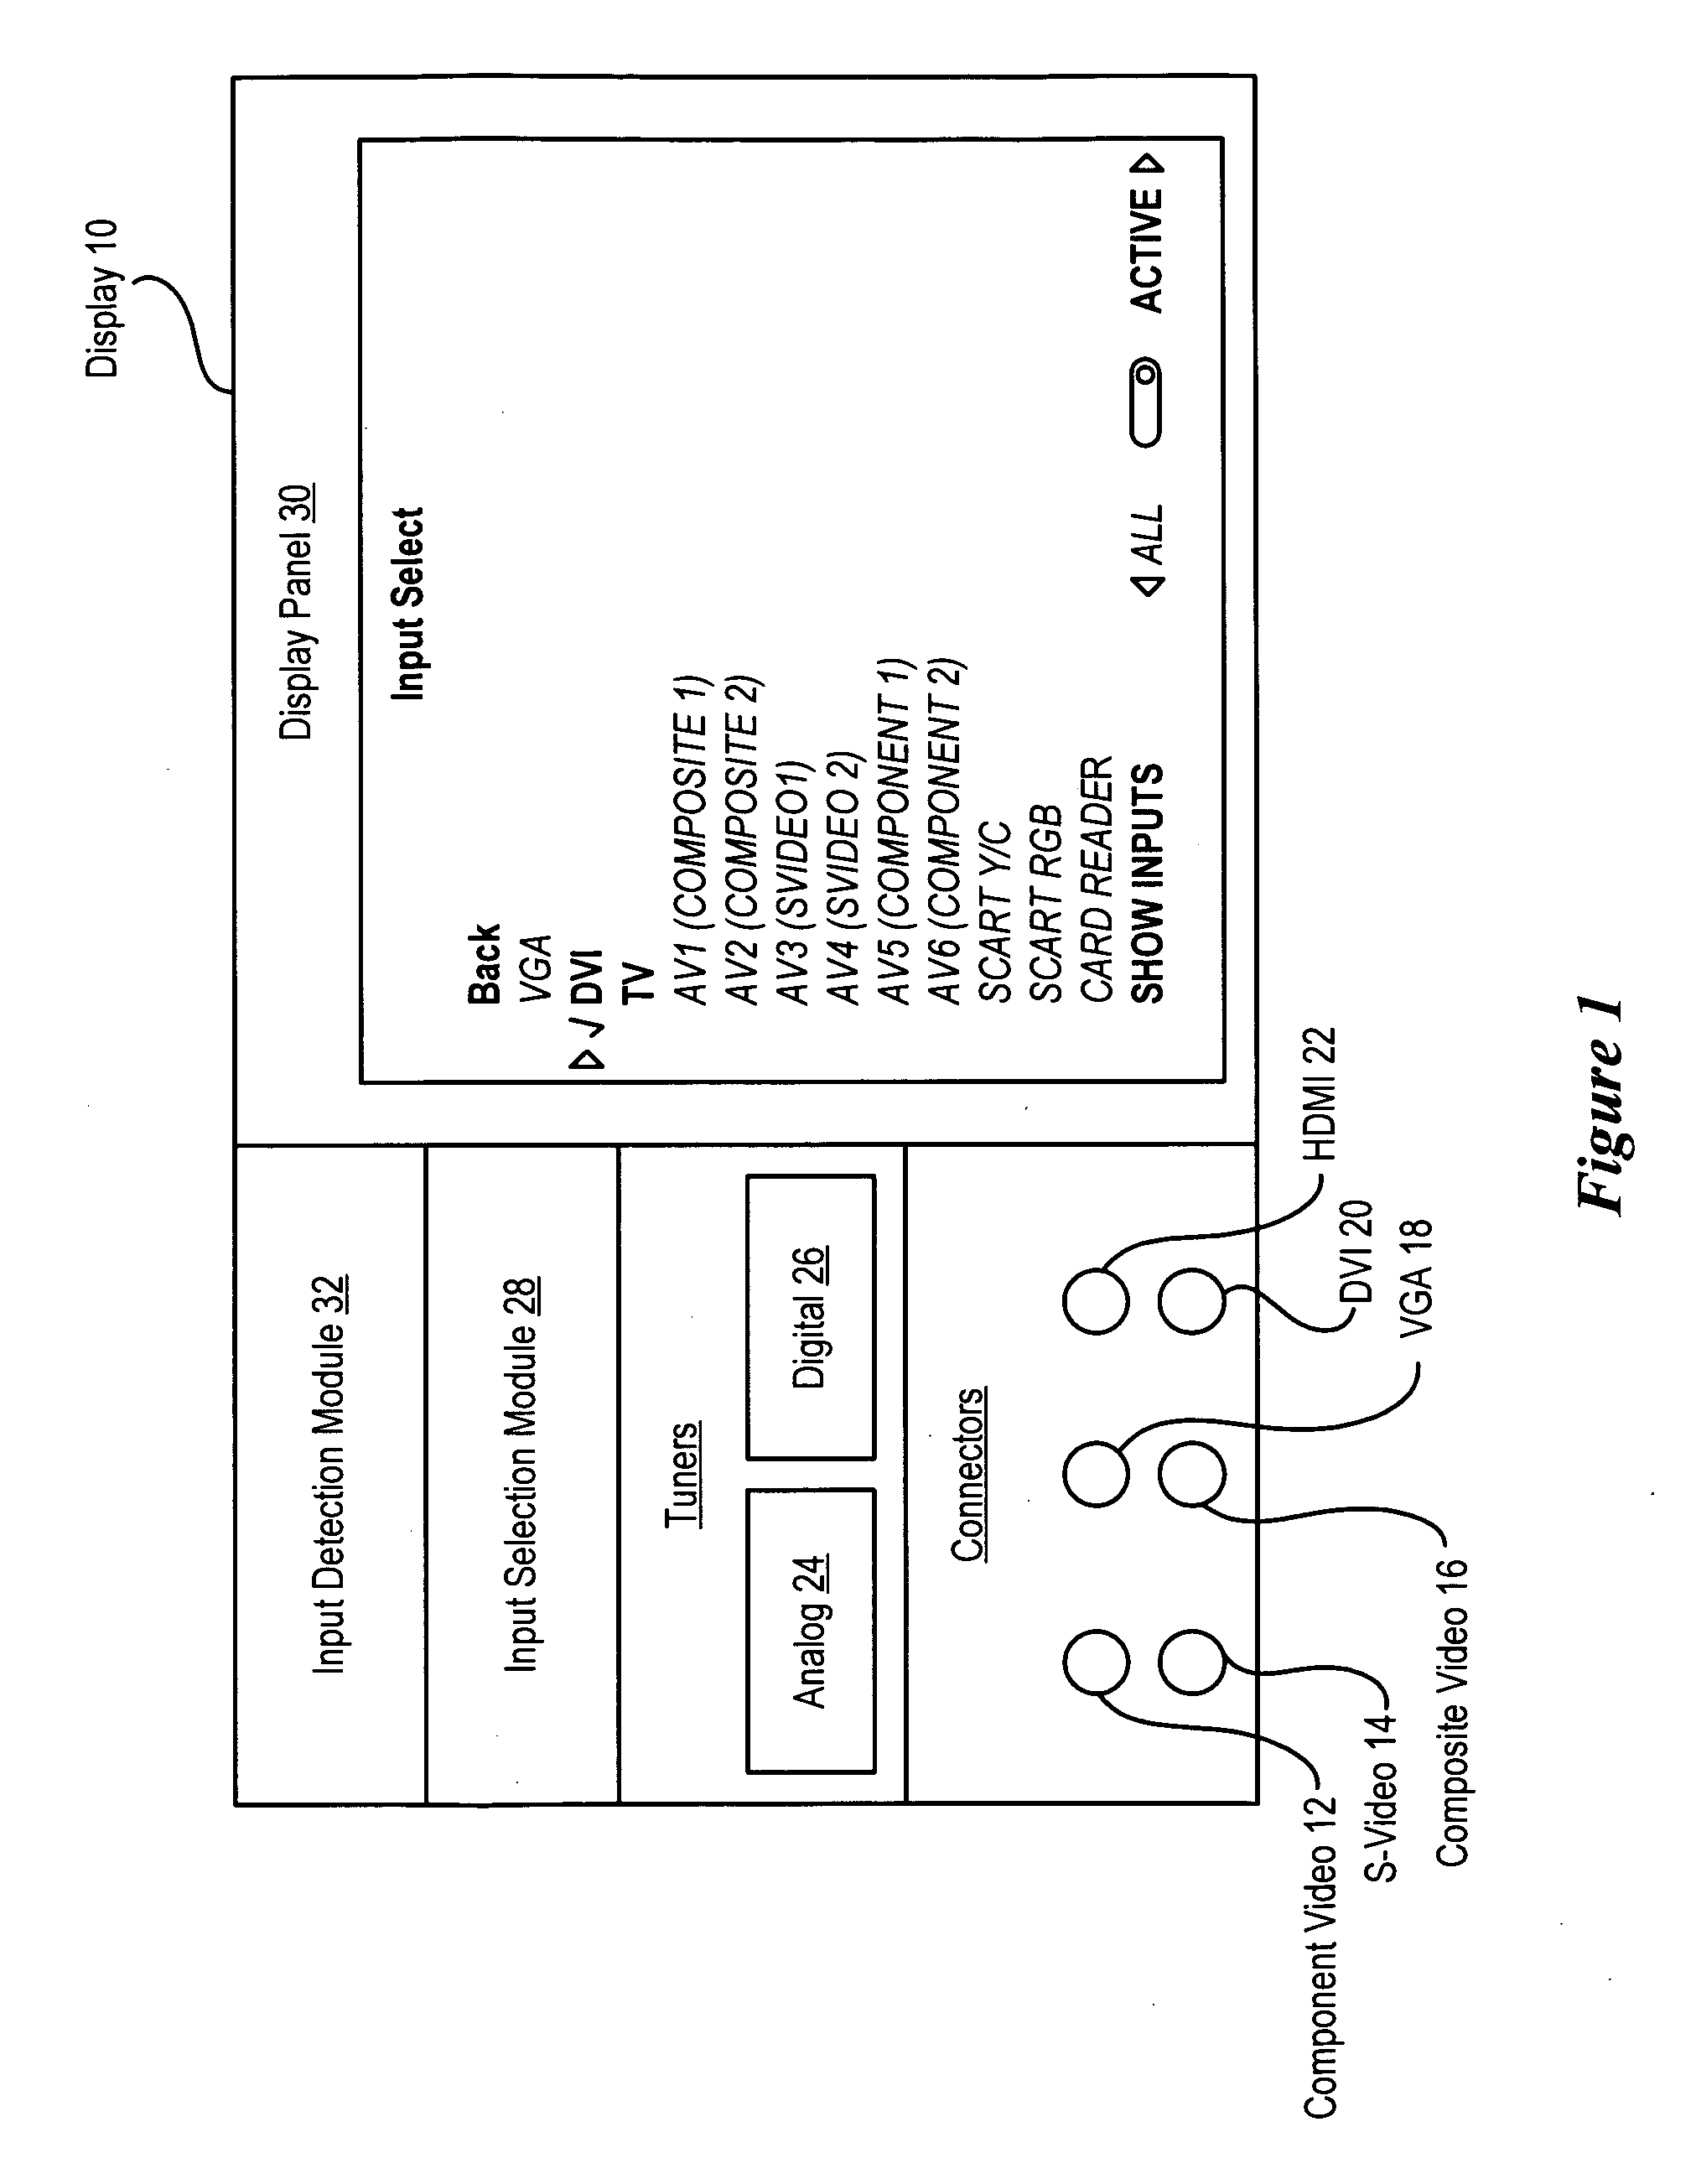 System and method for display input selection